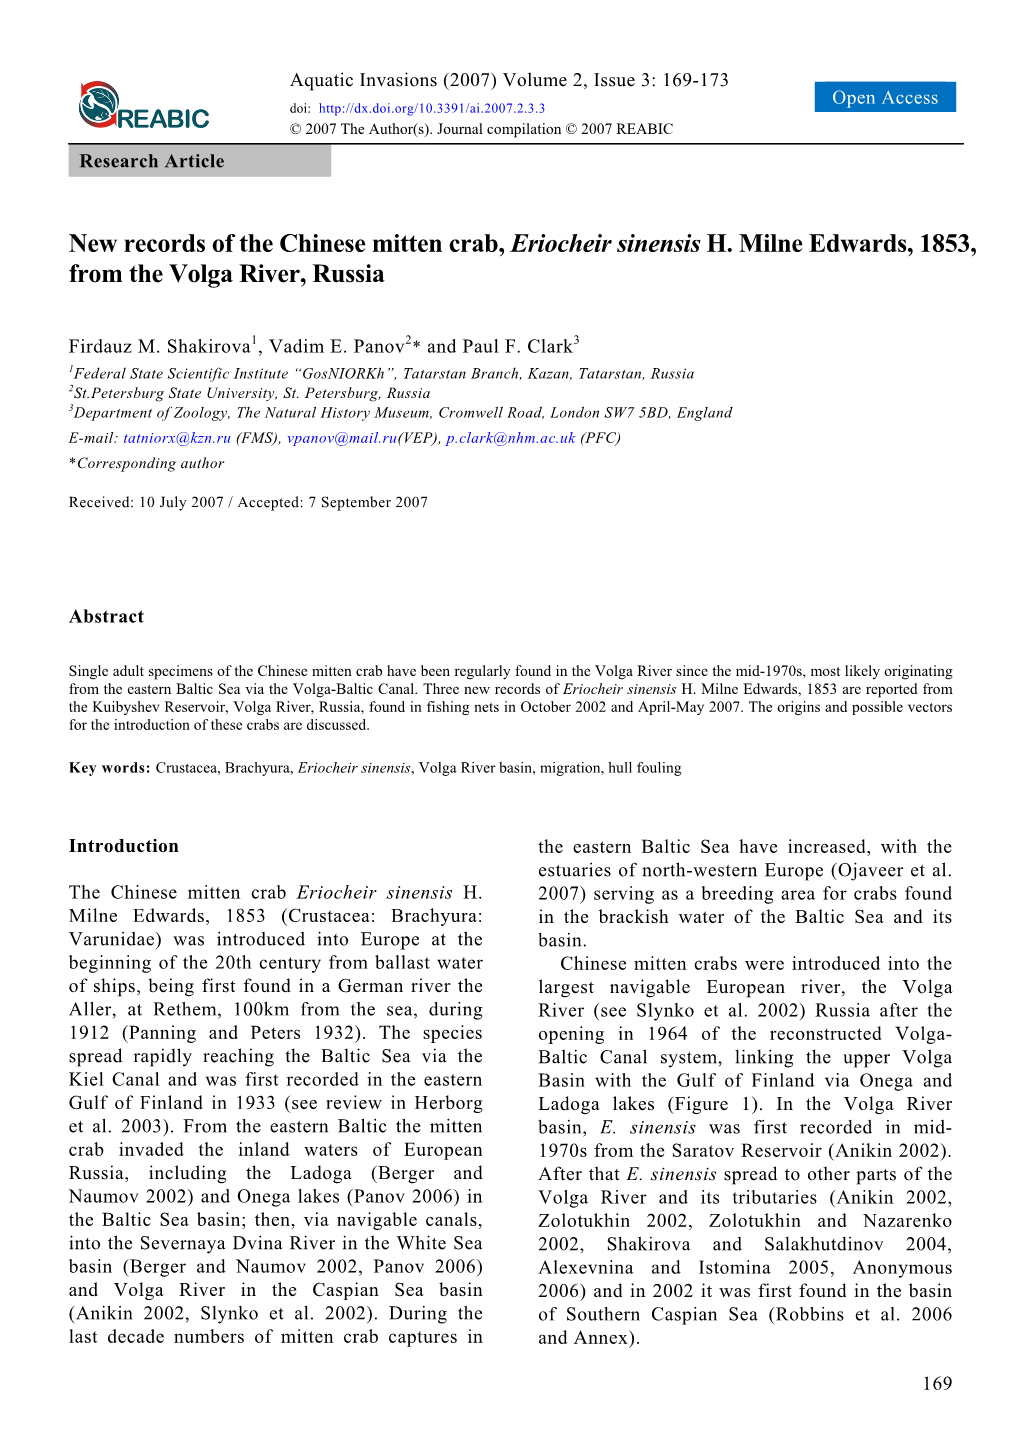 New Records of the Chinese Mitten Crab, Eriocheir Sinensis H. Milne Edwards, 1853, from the Volga River, Russia